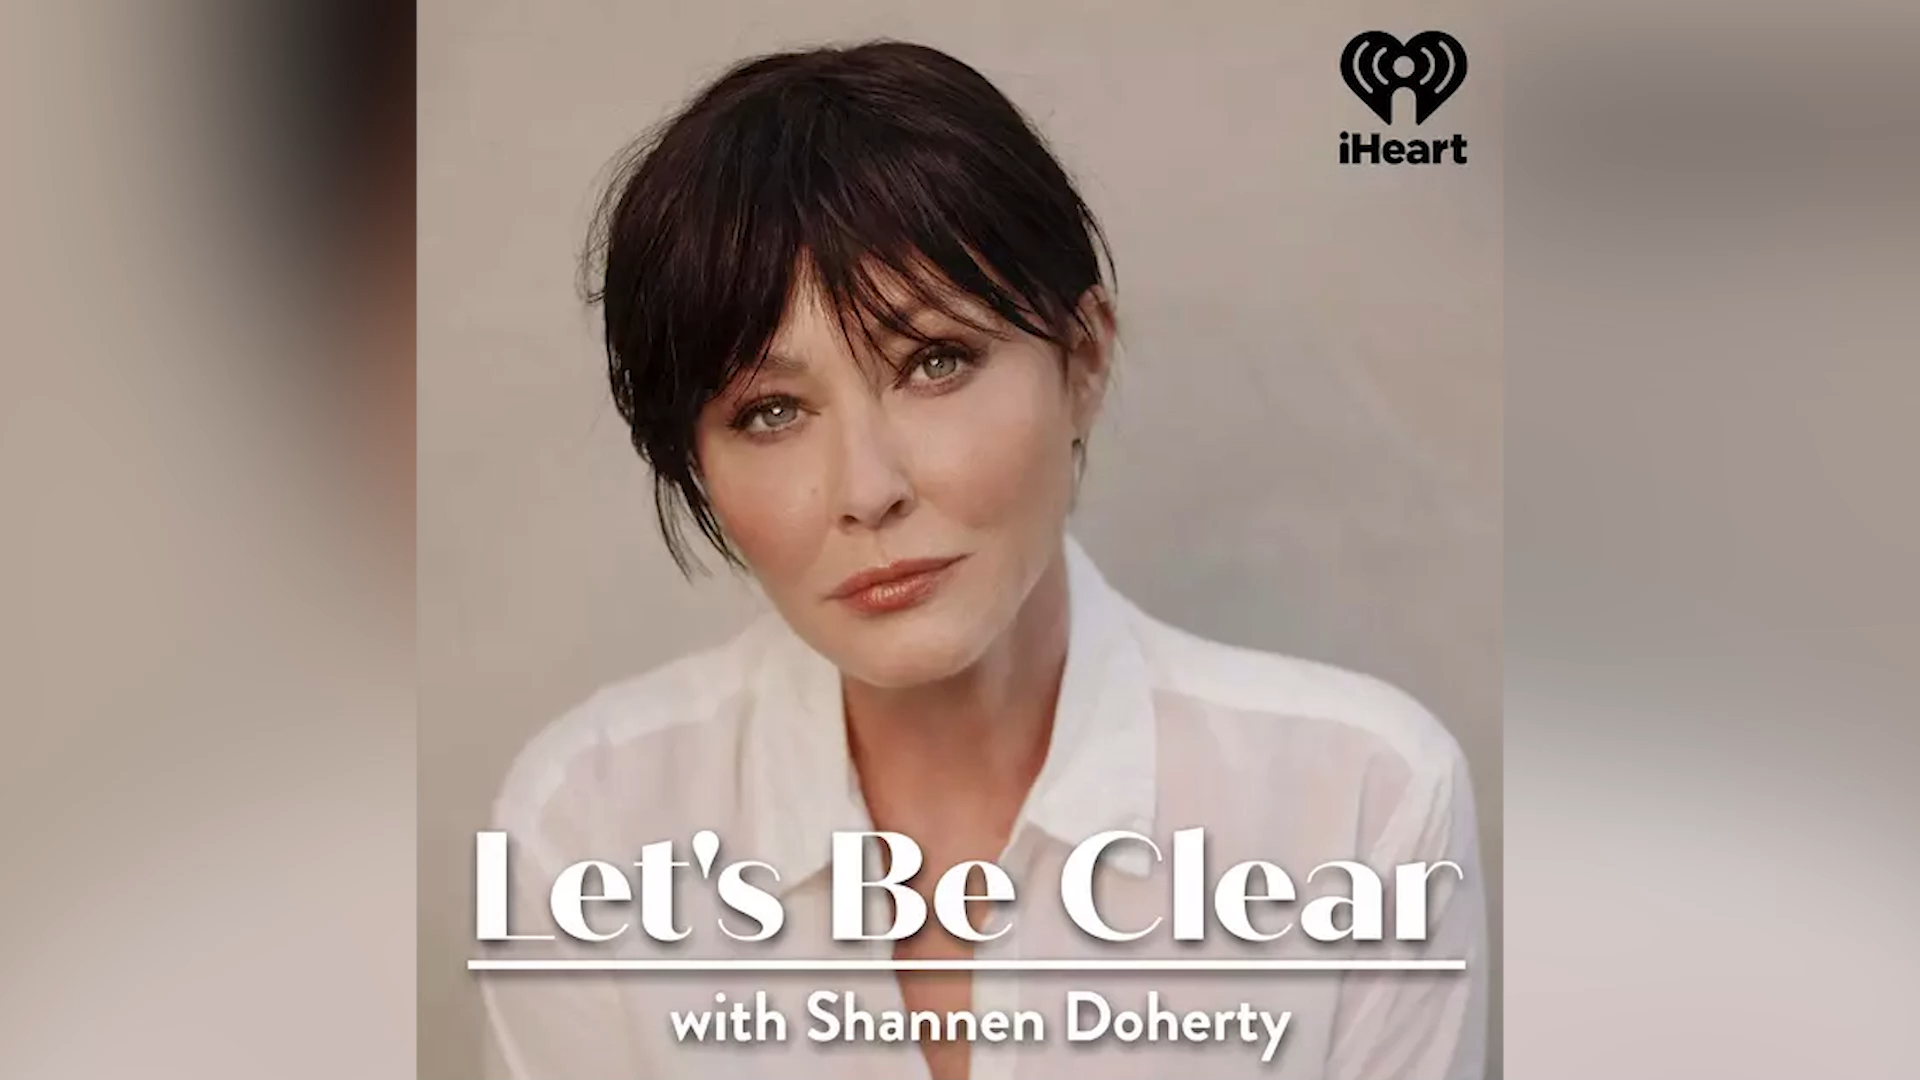 Shannen Doherty opens up about her divorce and cancer diagnosis